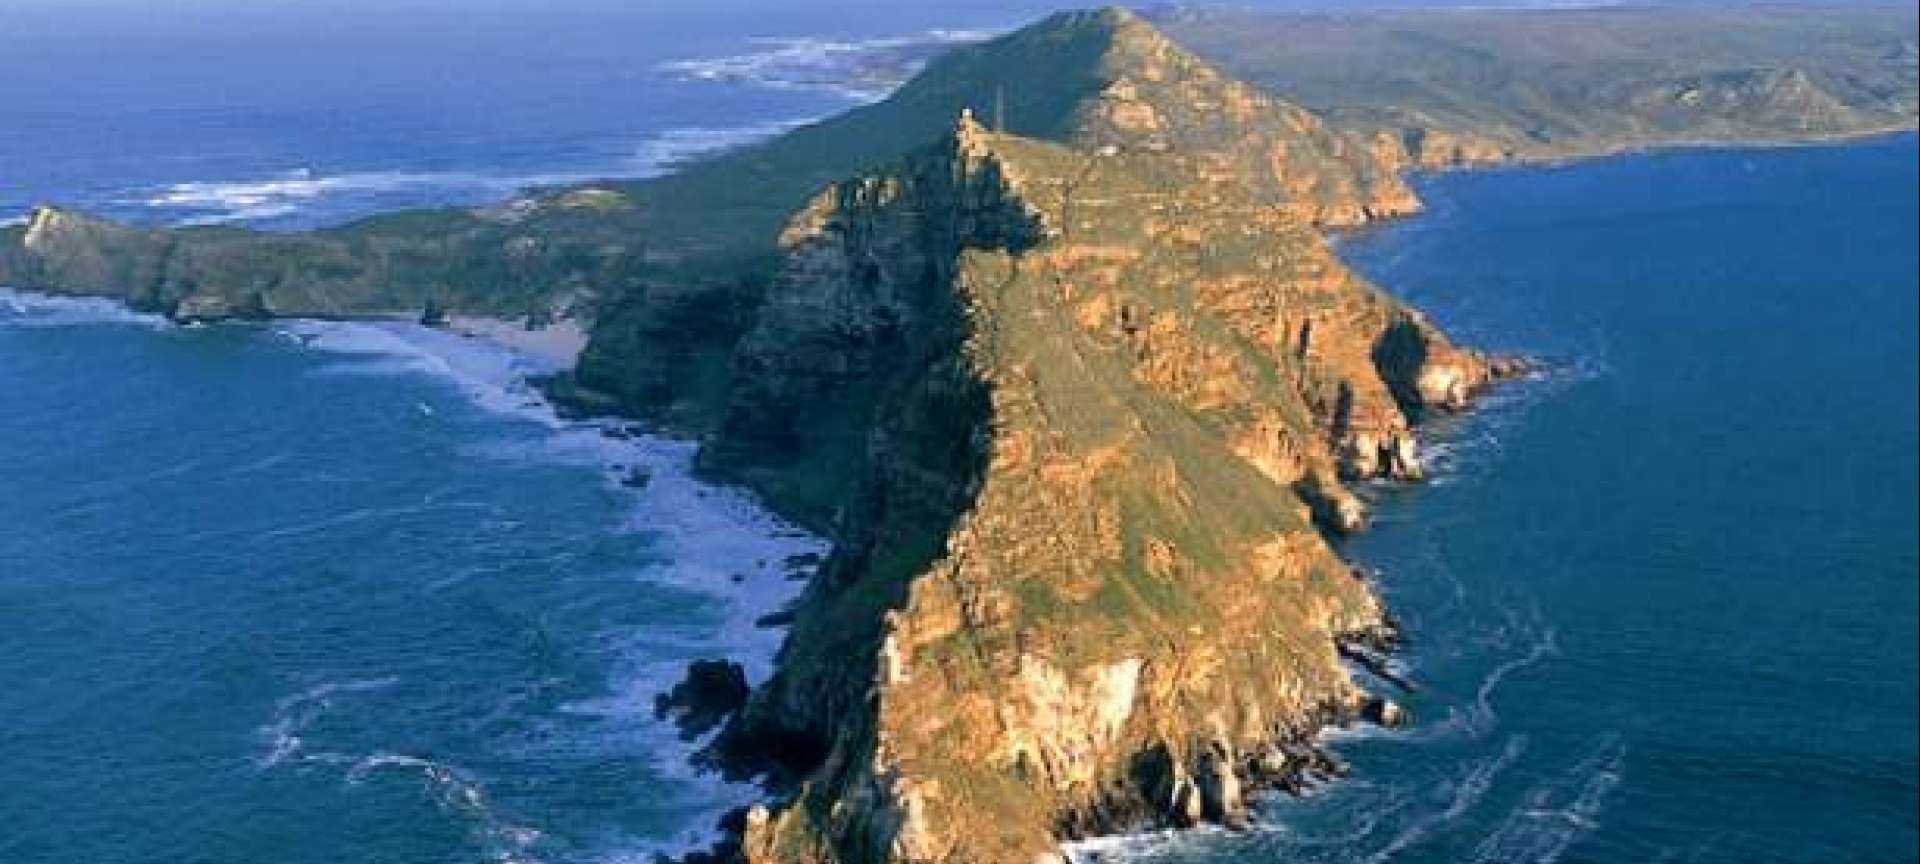 The south peninsula is best known for Cape Point Nature Reserve - the most south western corner of the continent.